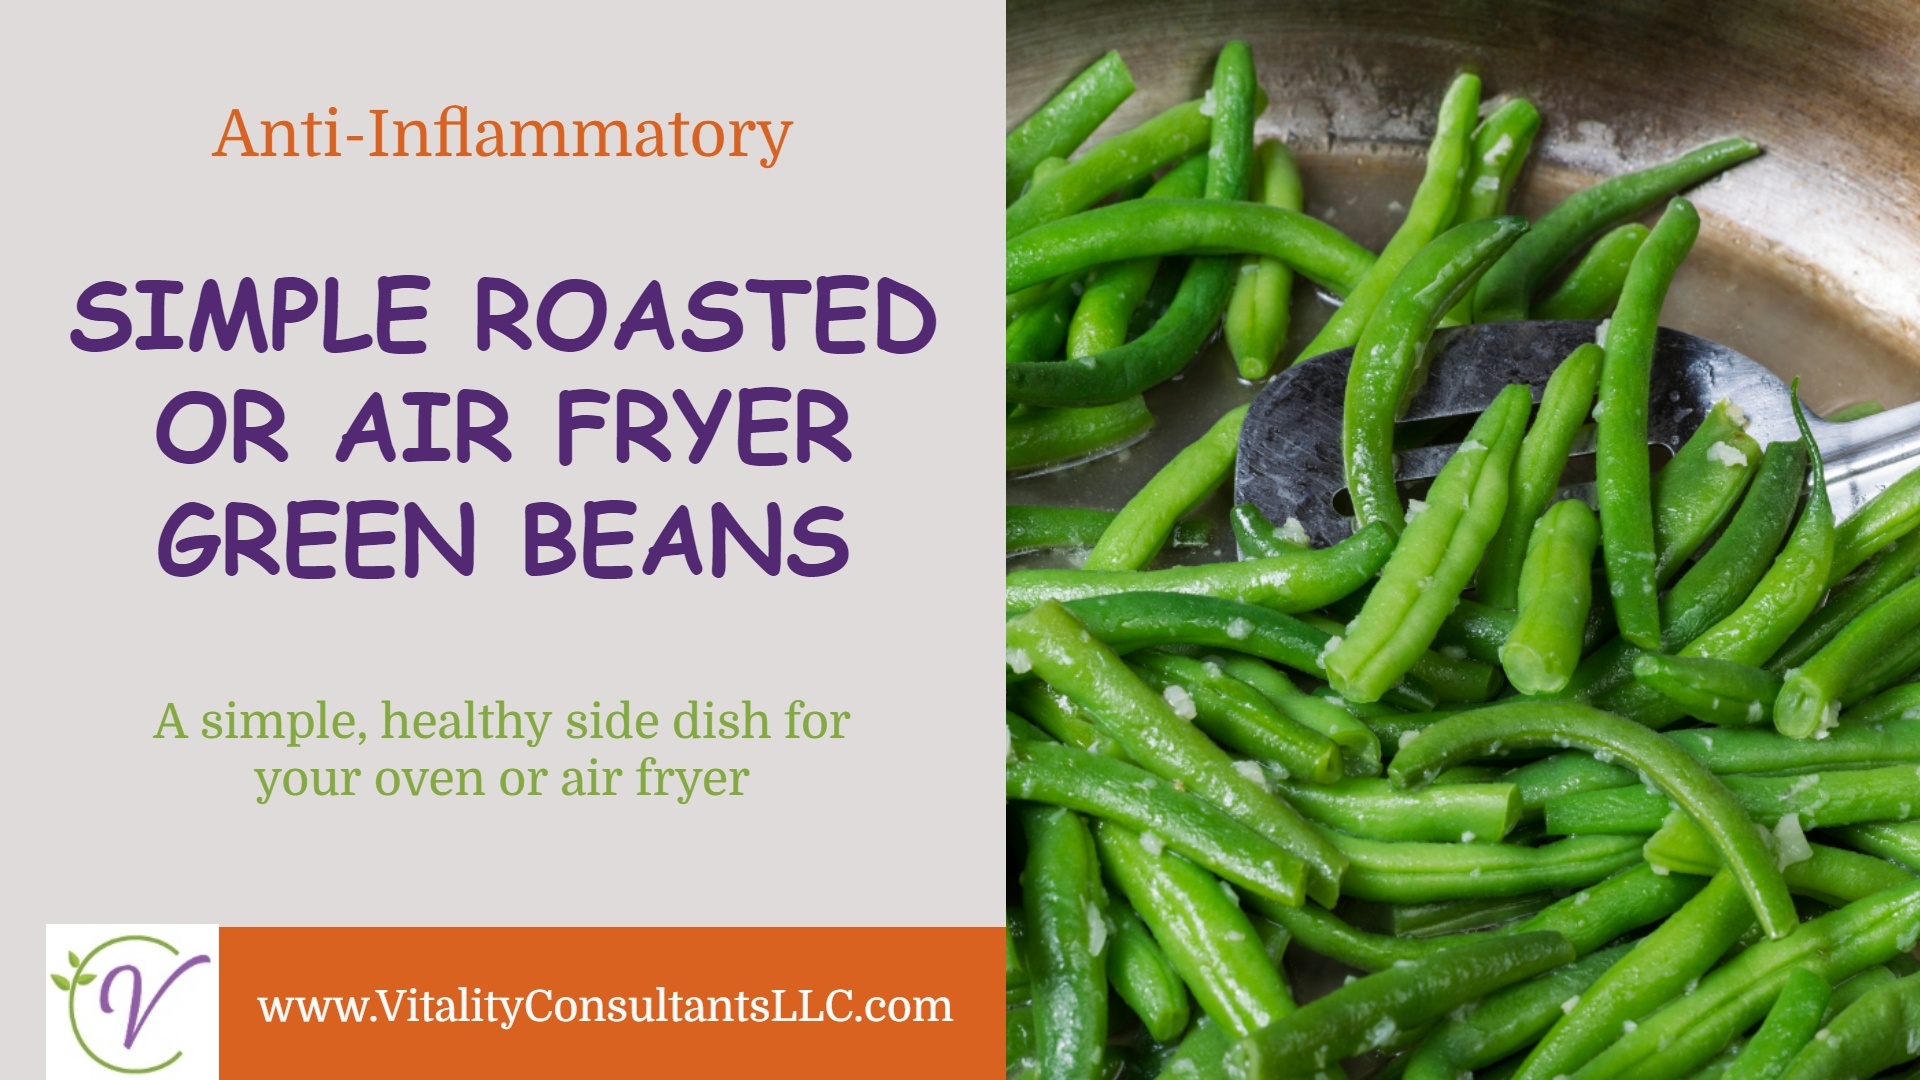 Simple Roasted or Air Fryer Green Beans